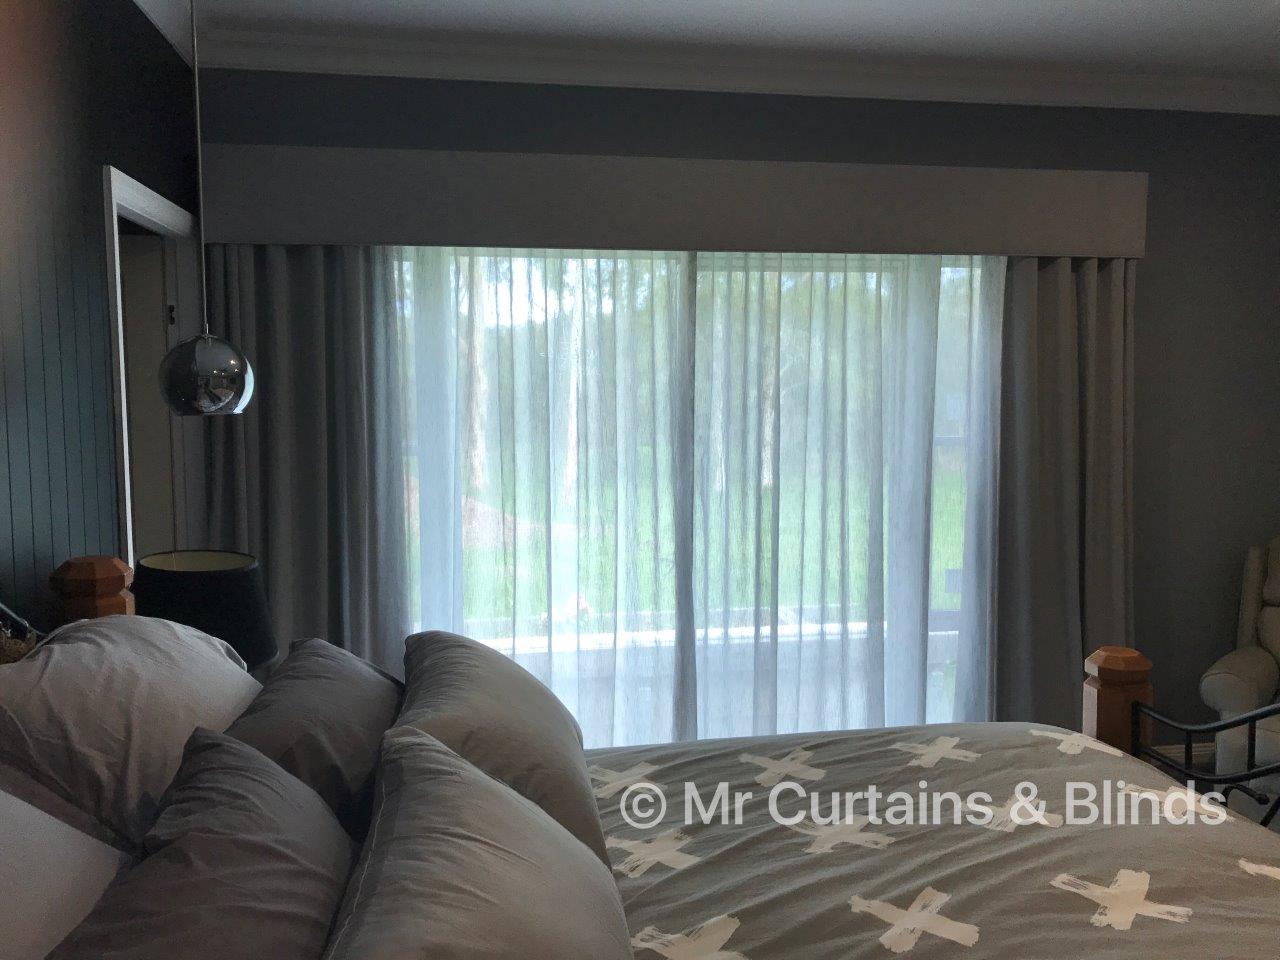 Sfold Sheer Curtains with Blockout lining and Pelmet